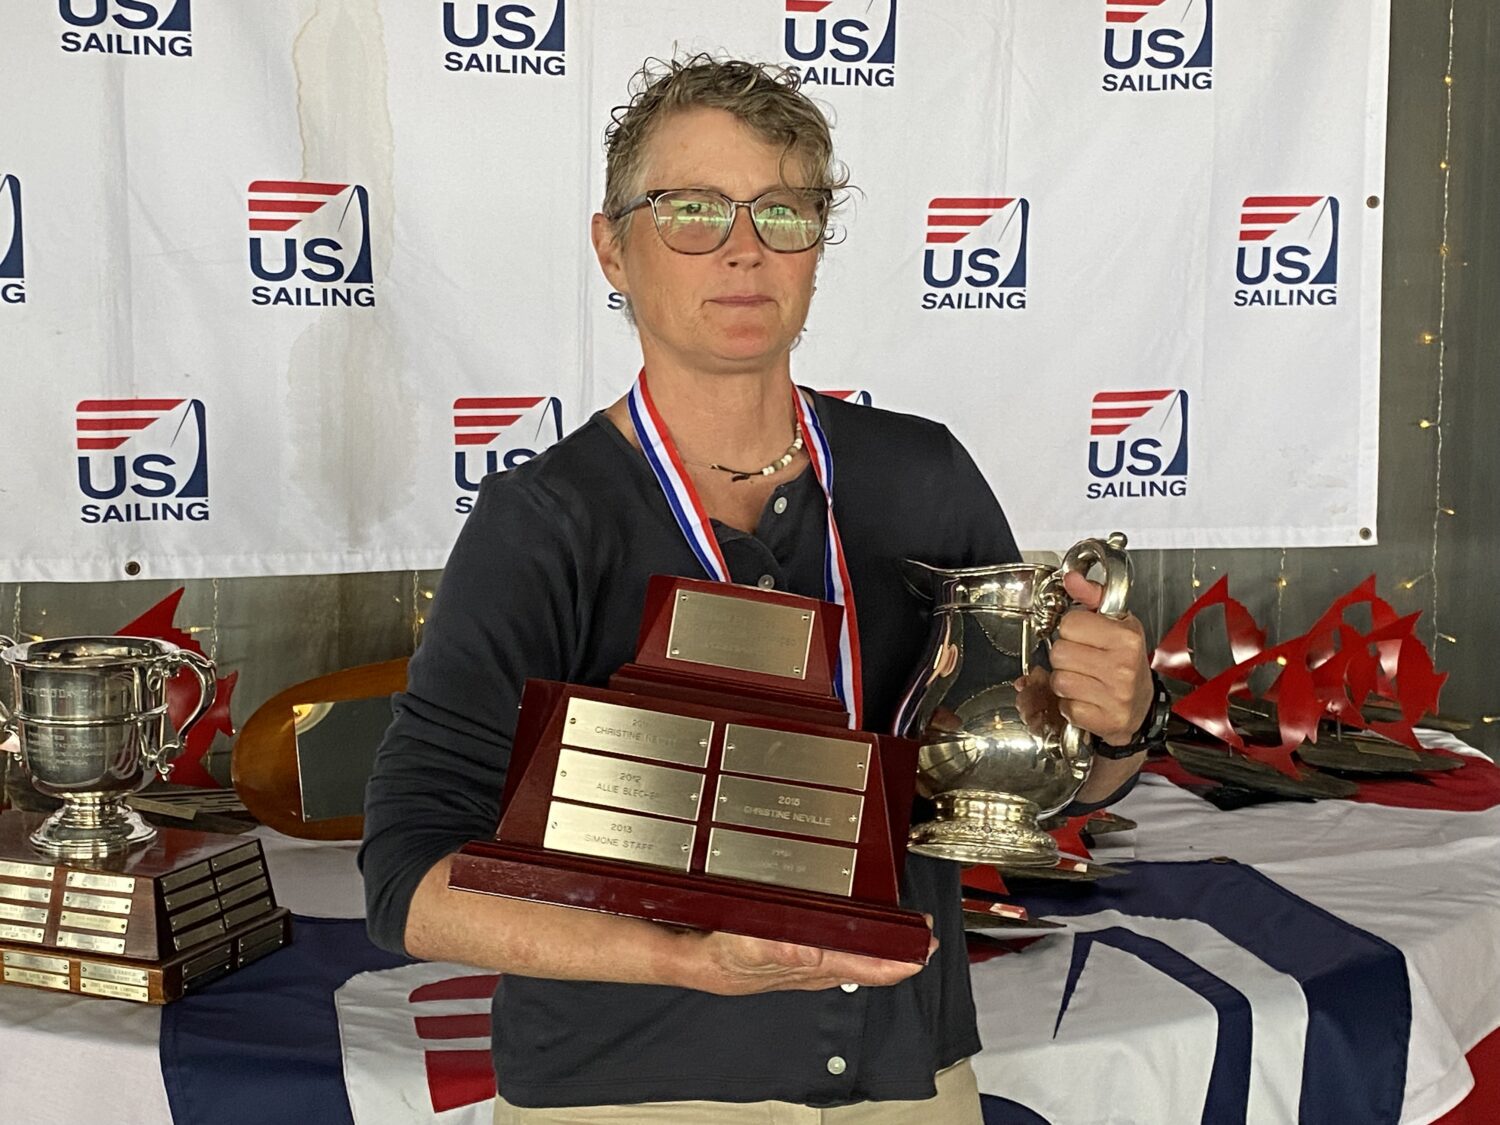 Elaine Parshall, winner of the Helen Hanley Trophy and U.S. Singlehanded Champion, women's division